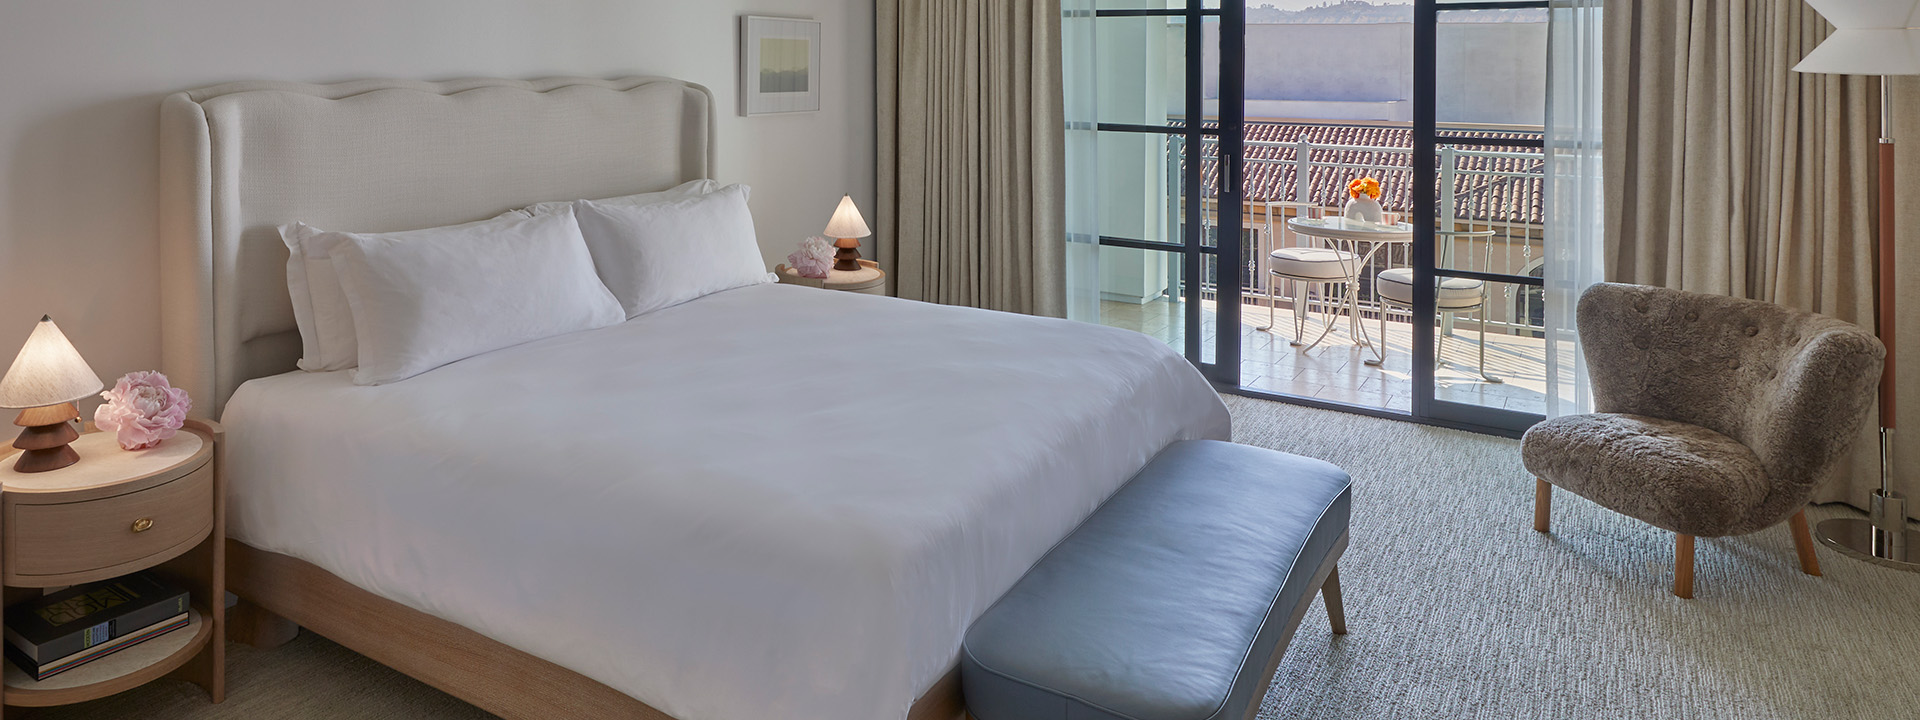 Tidy bedroom, snug bed, bedside lamps, balcony chairs, providing stunning cityscape panorama vistas.